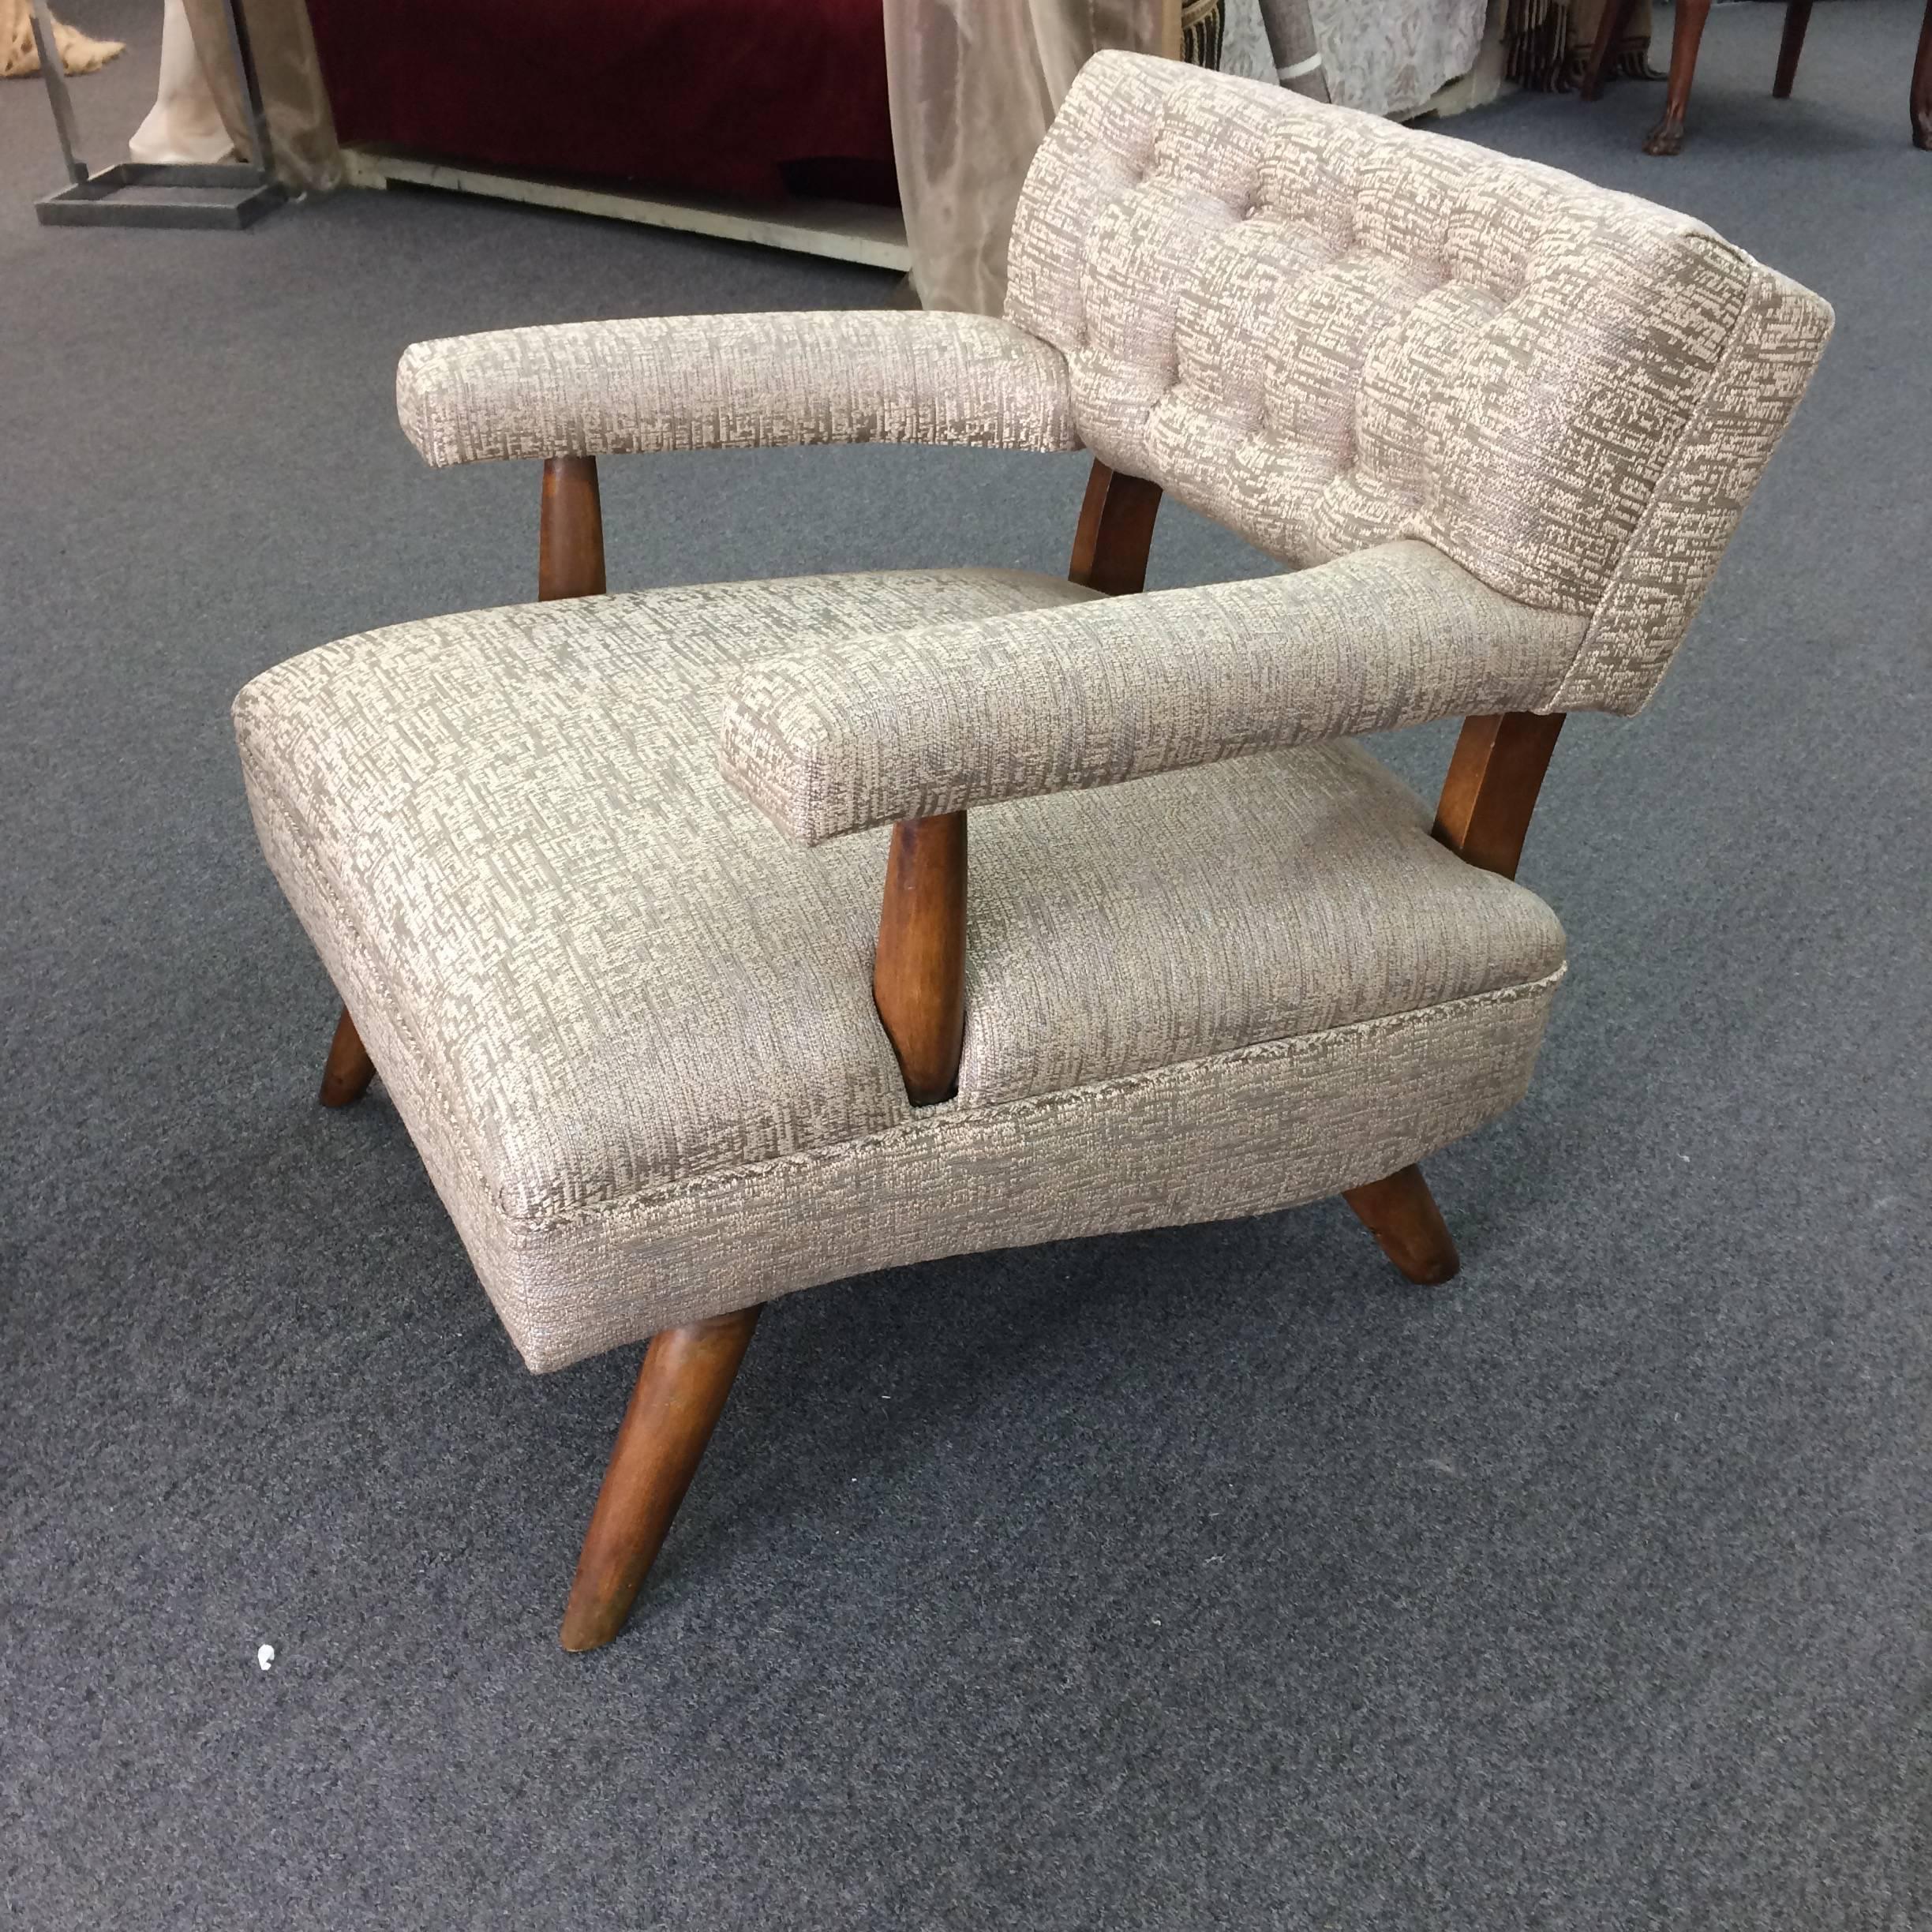 Wonderful Danish design armchair with contemporary tapered legs that splay outward, completely redone in era appropriate weave fabric in a neutral greyish taupe.